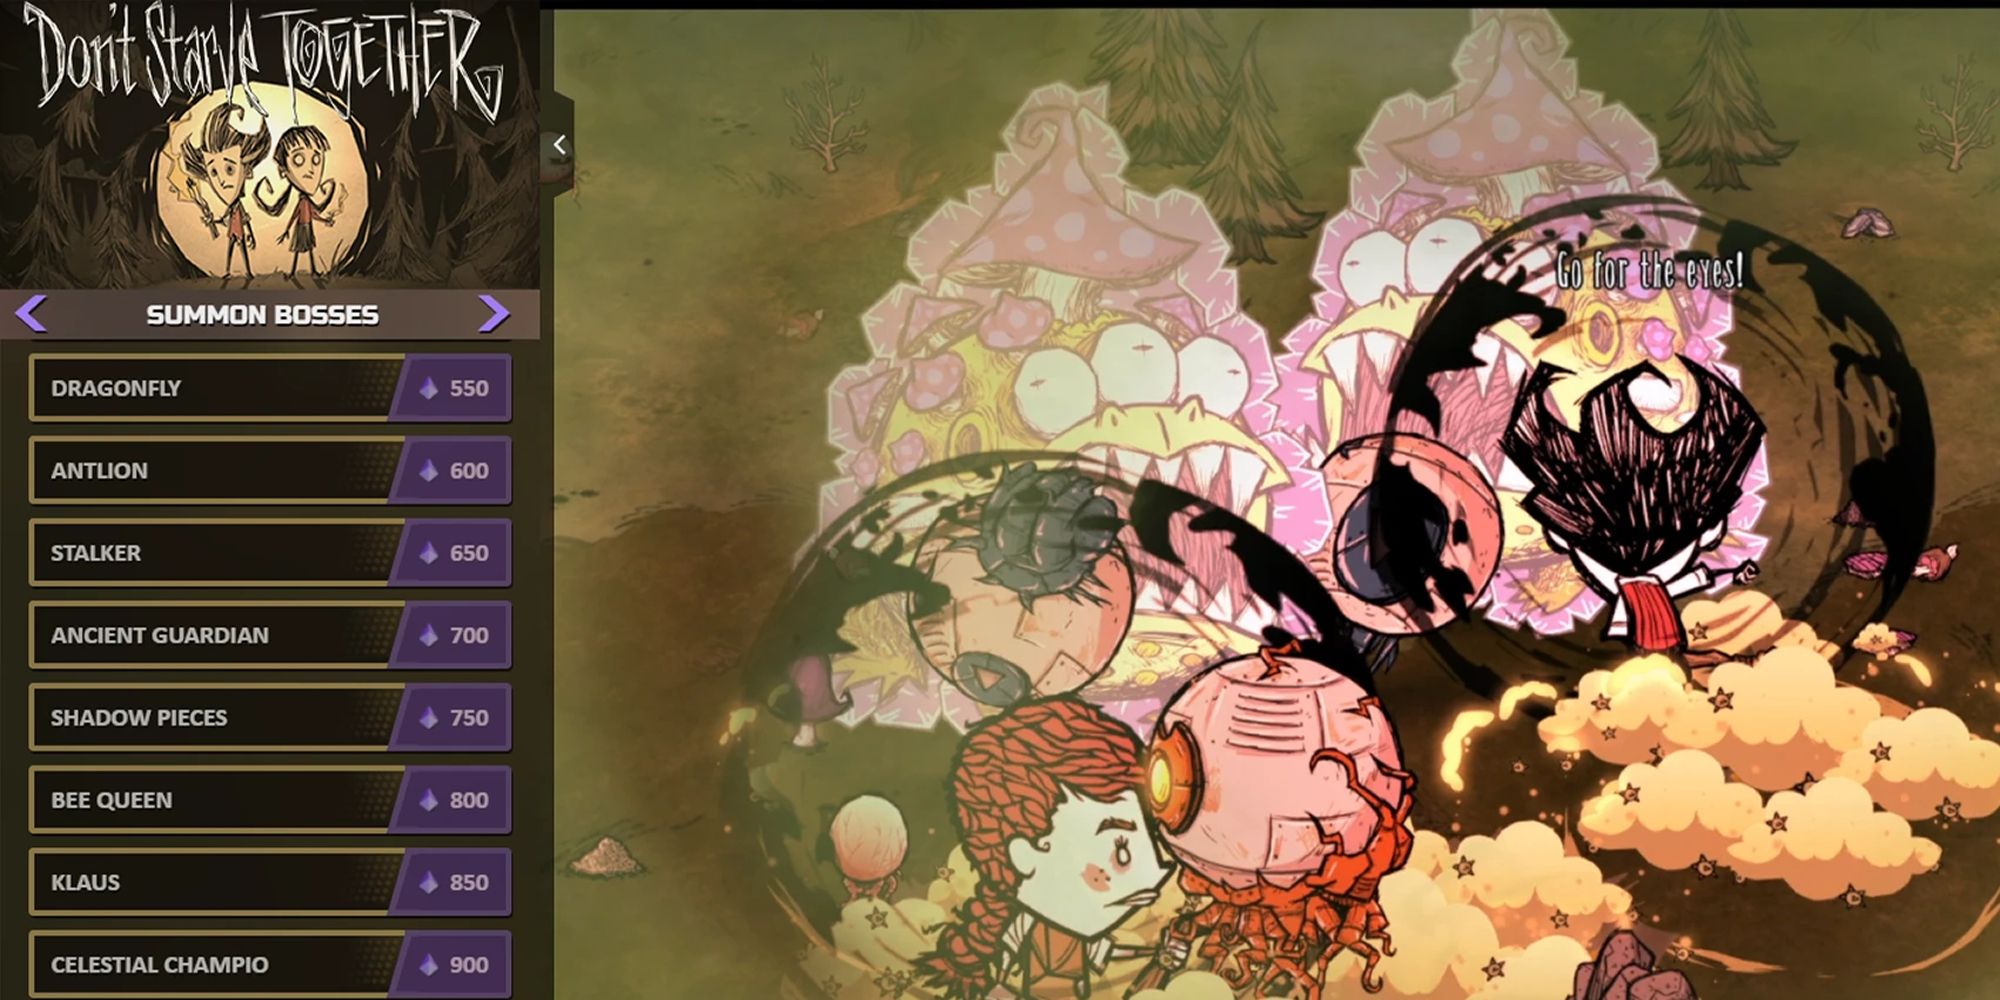 Don't Starve Together Twitch Integration Mod Showing Characters Fighting Aloongside Twitch UI